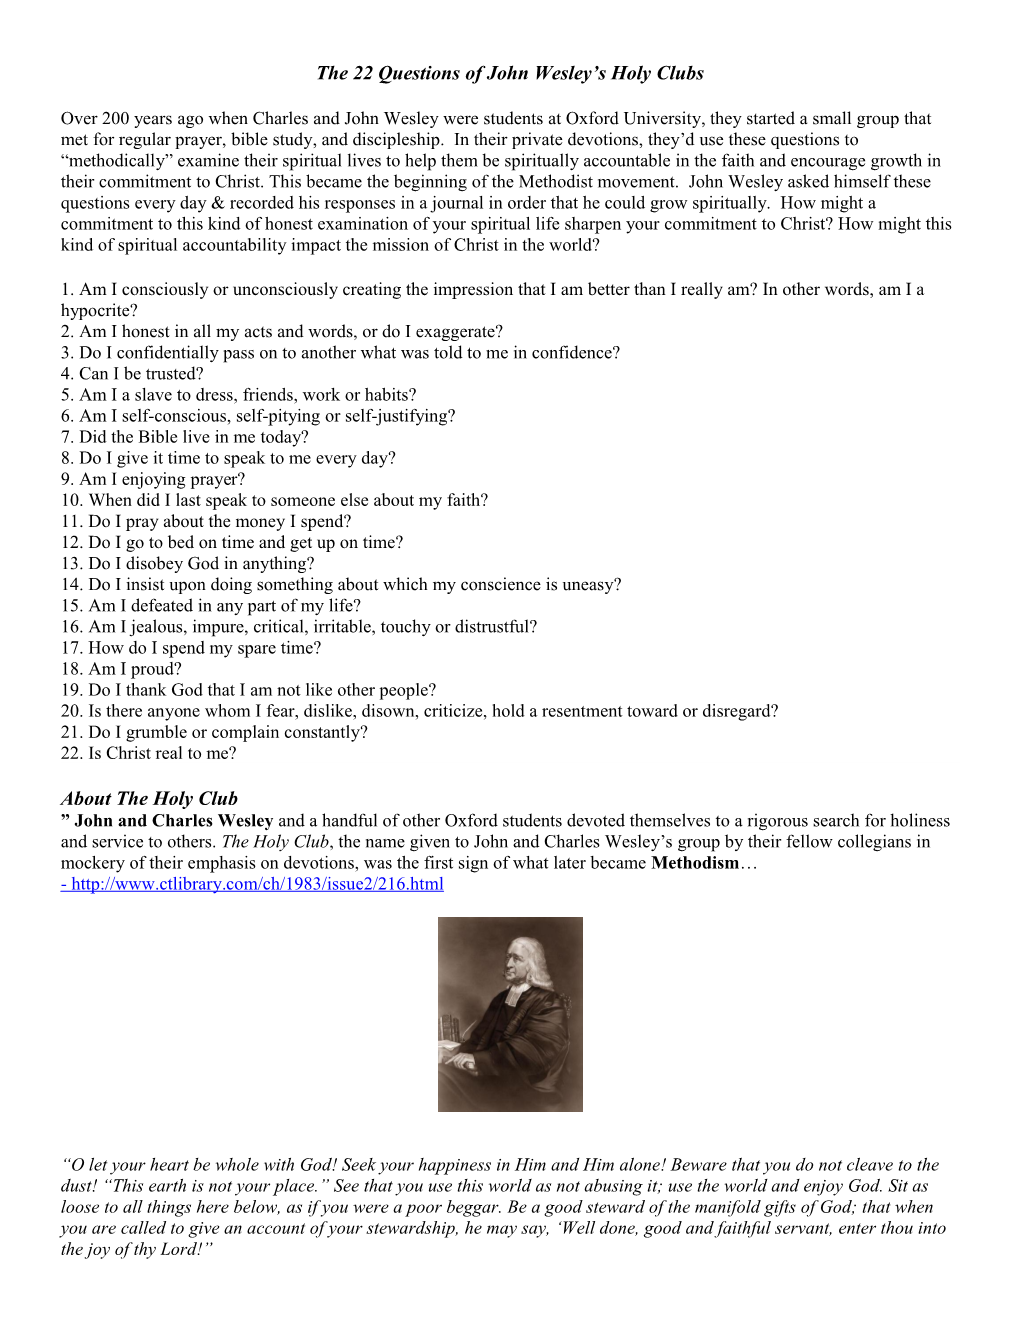 The 22 Questions of John Wesley's Holy Clubs About the Holy Club